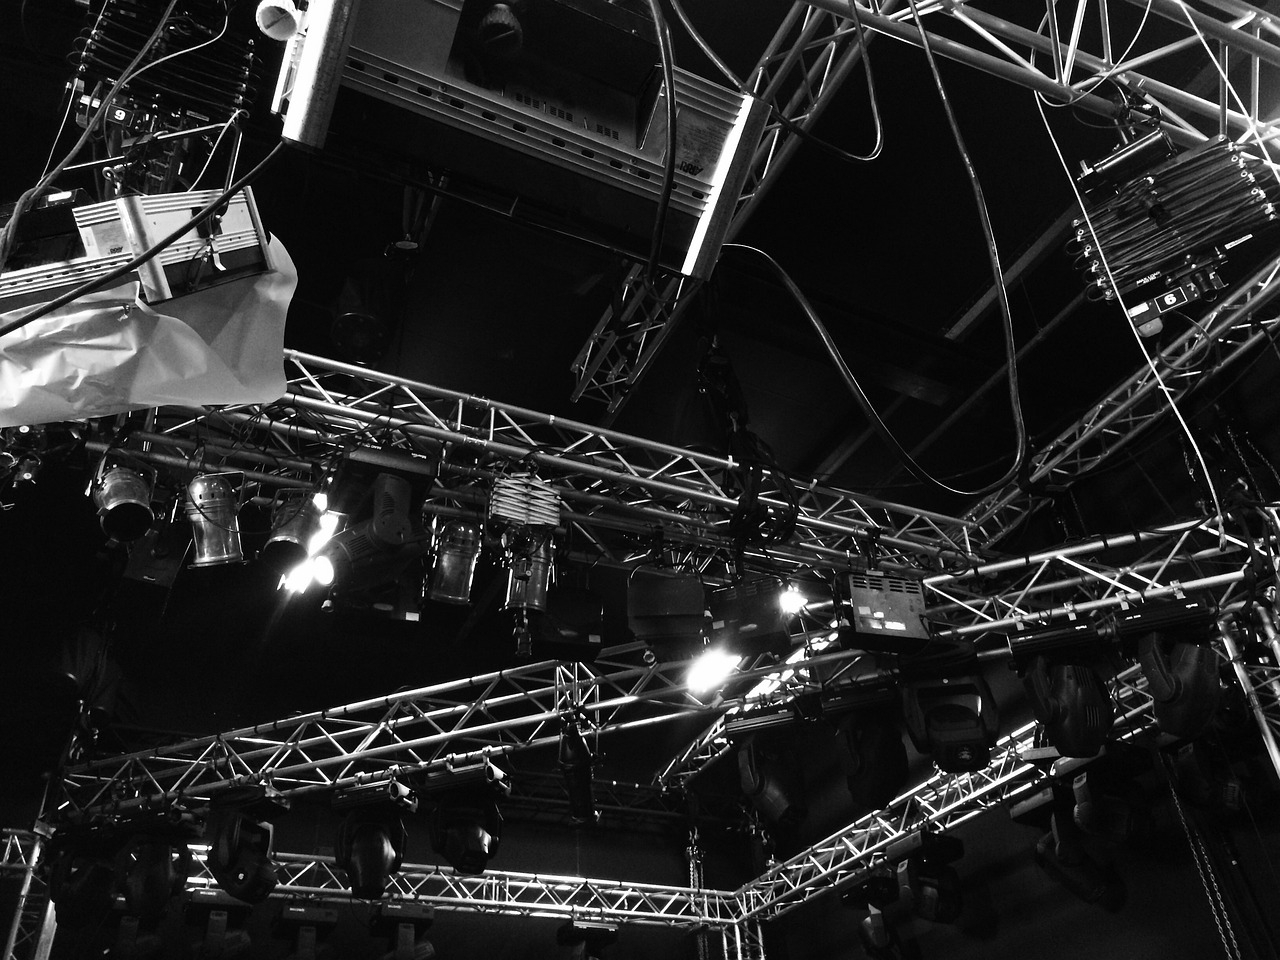 Black and white image of a light rig